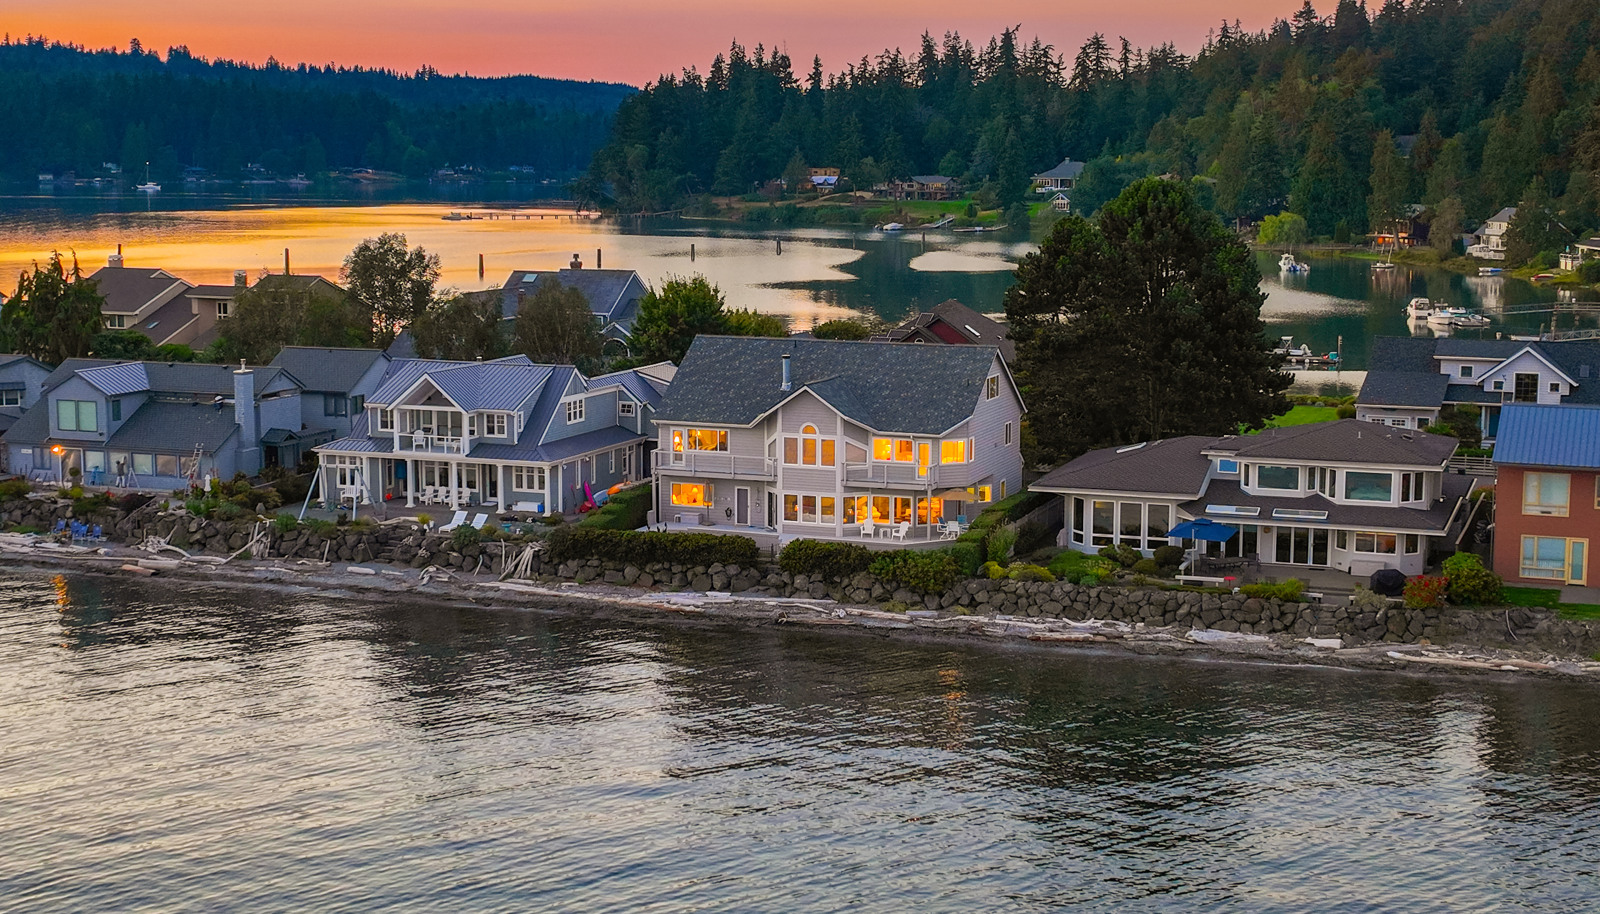 A sensational waterfront setting like no other.